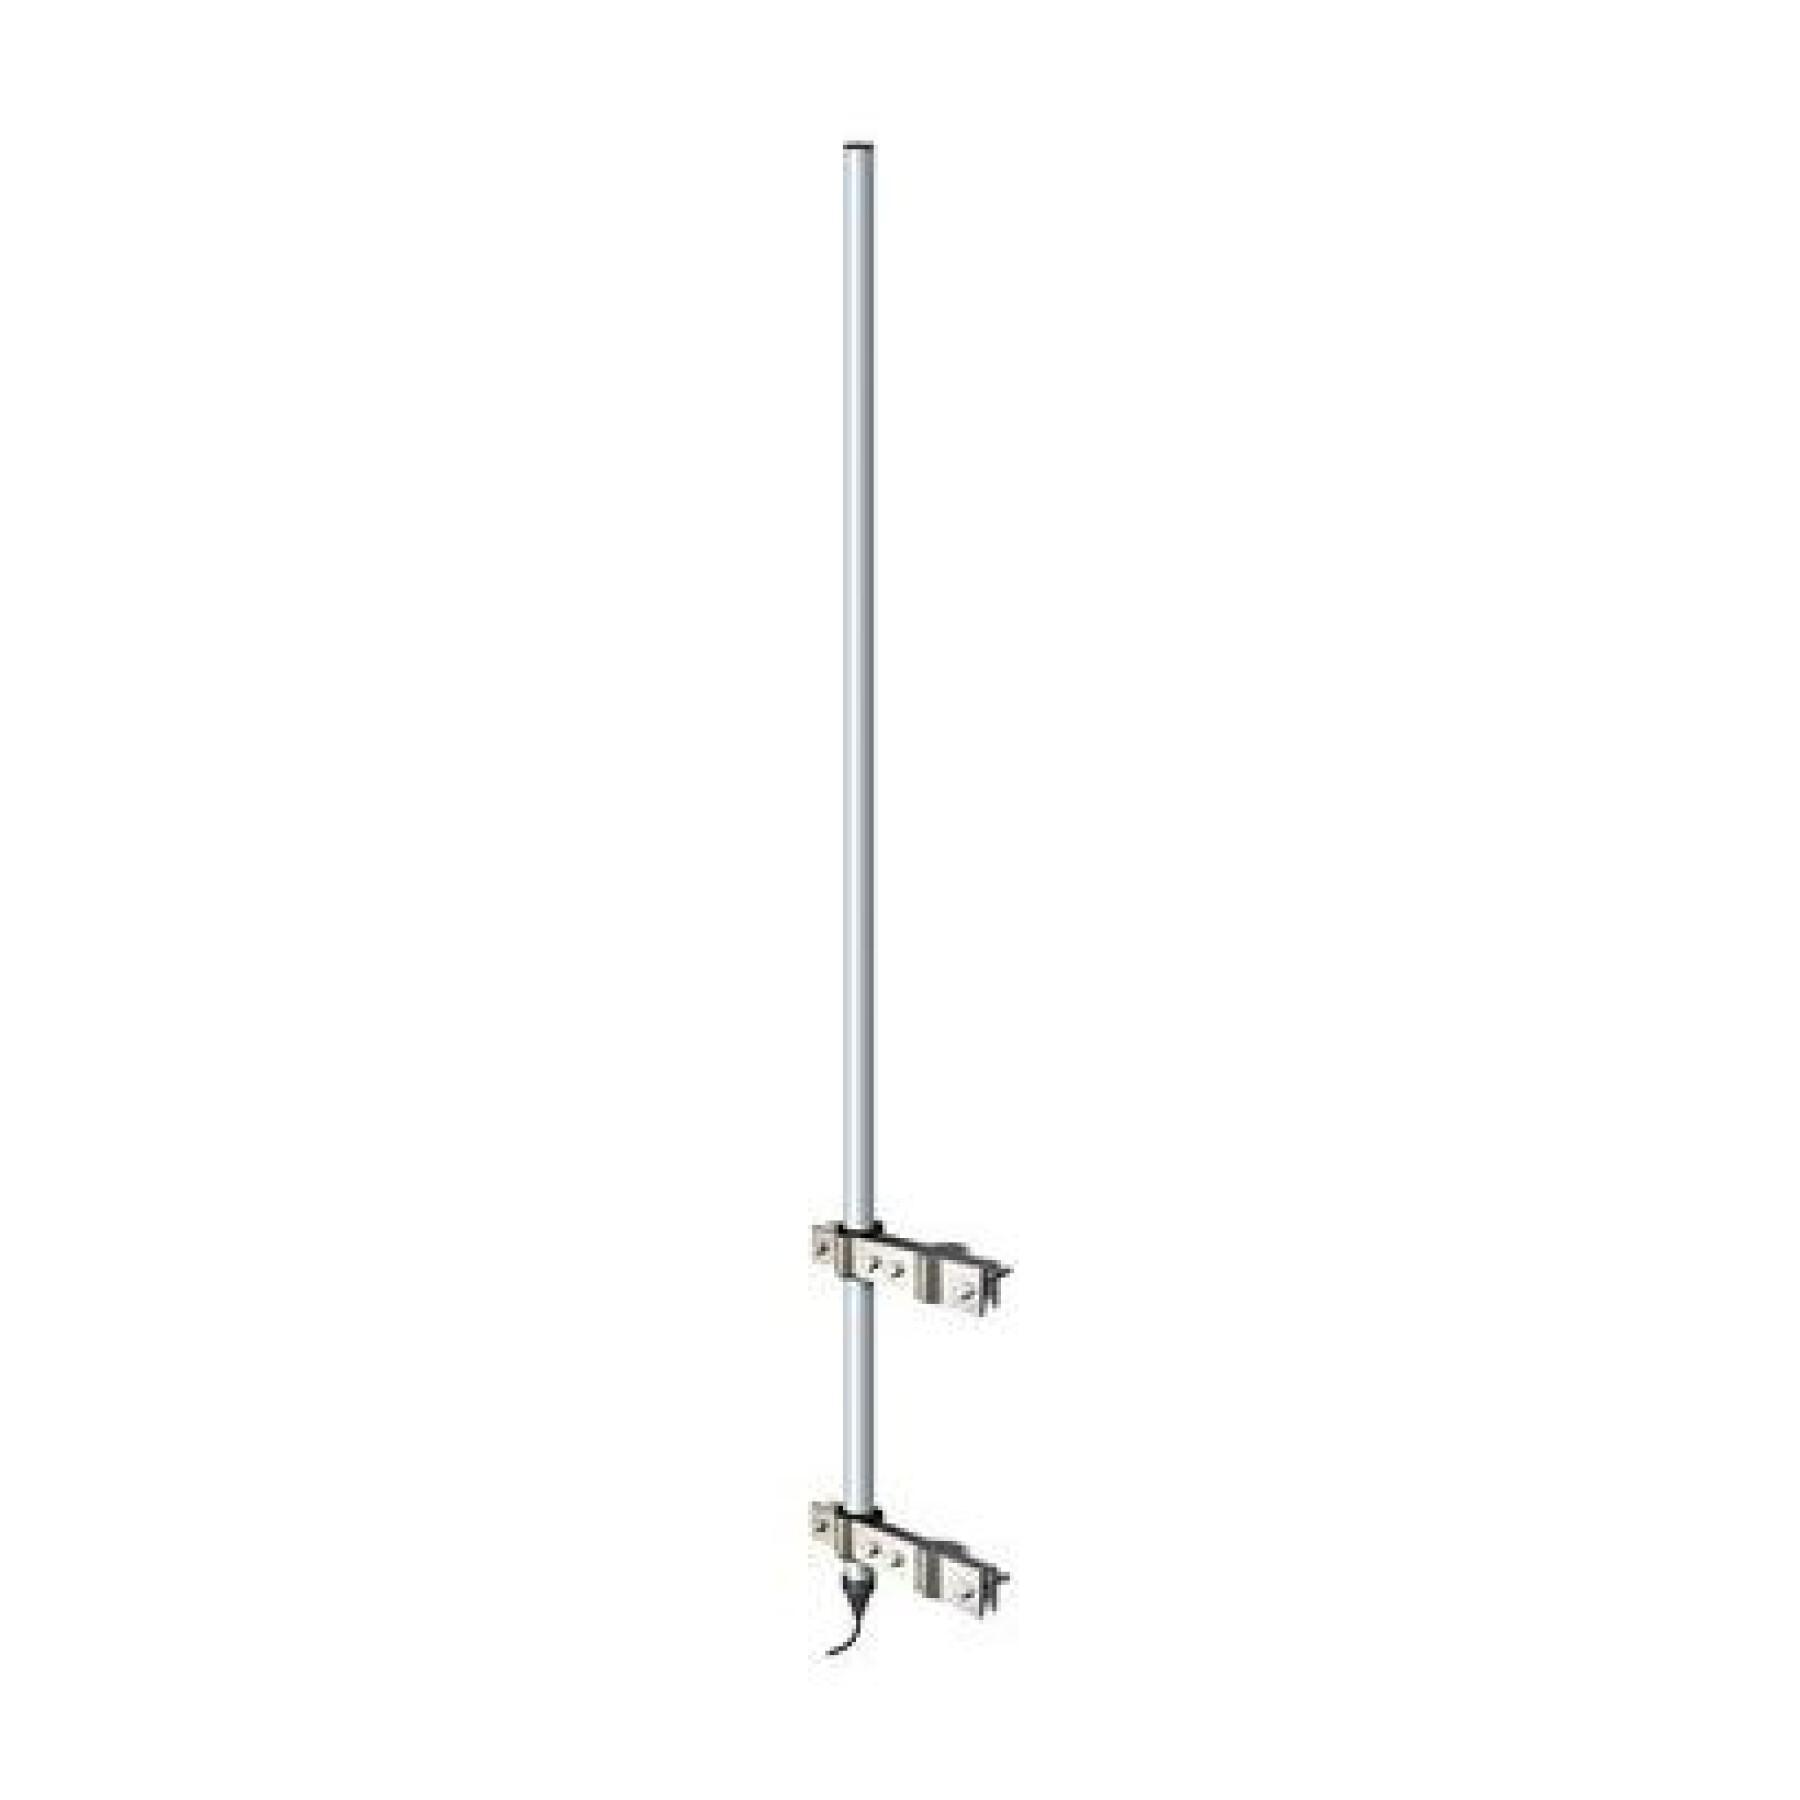 Professional ais antenna - 1.6m. 3db, 2 clamps support Shakespeare RG213